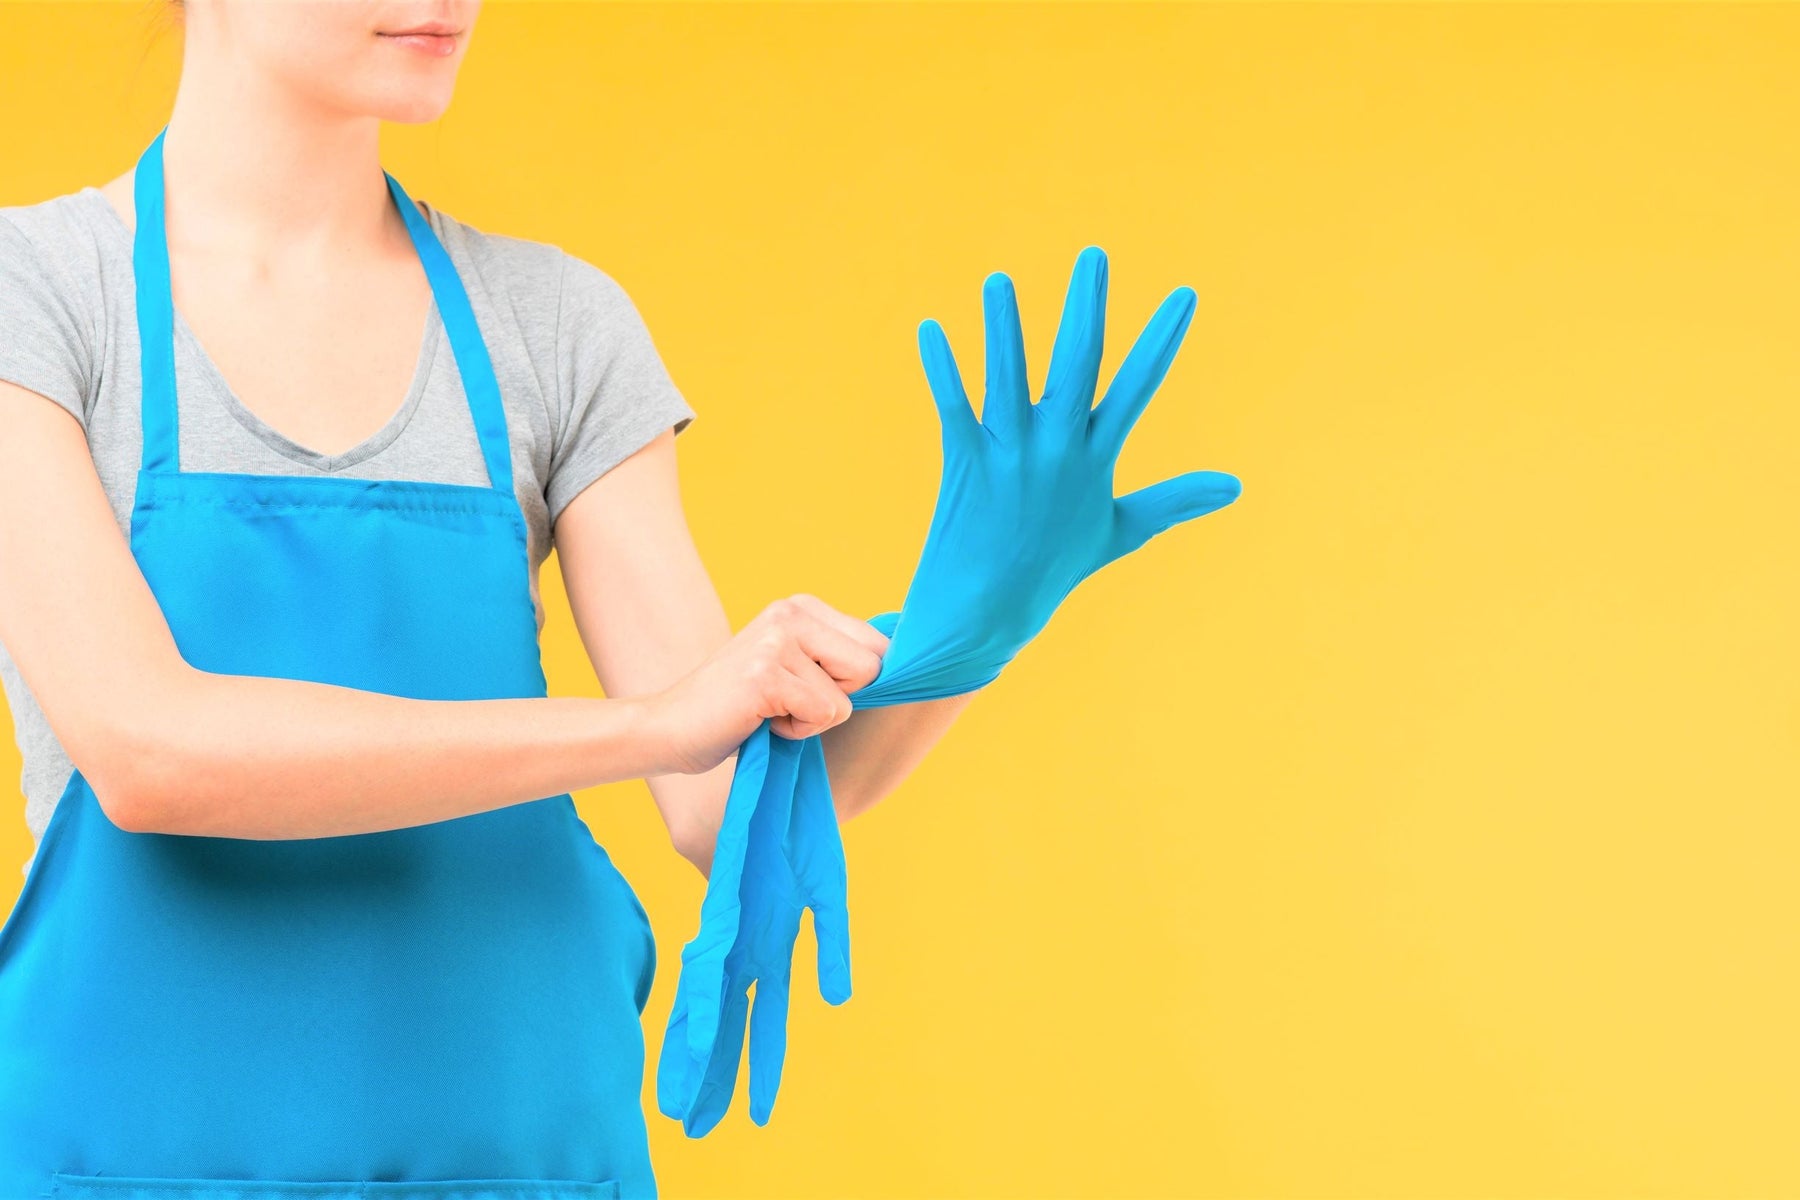 Blue Stretch Vinyl Gloves used for household cleaning